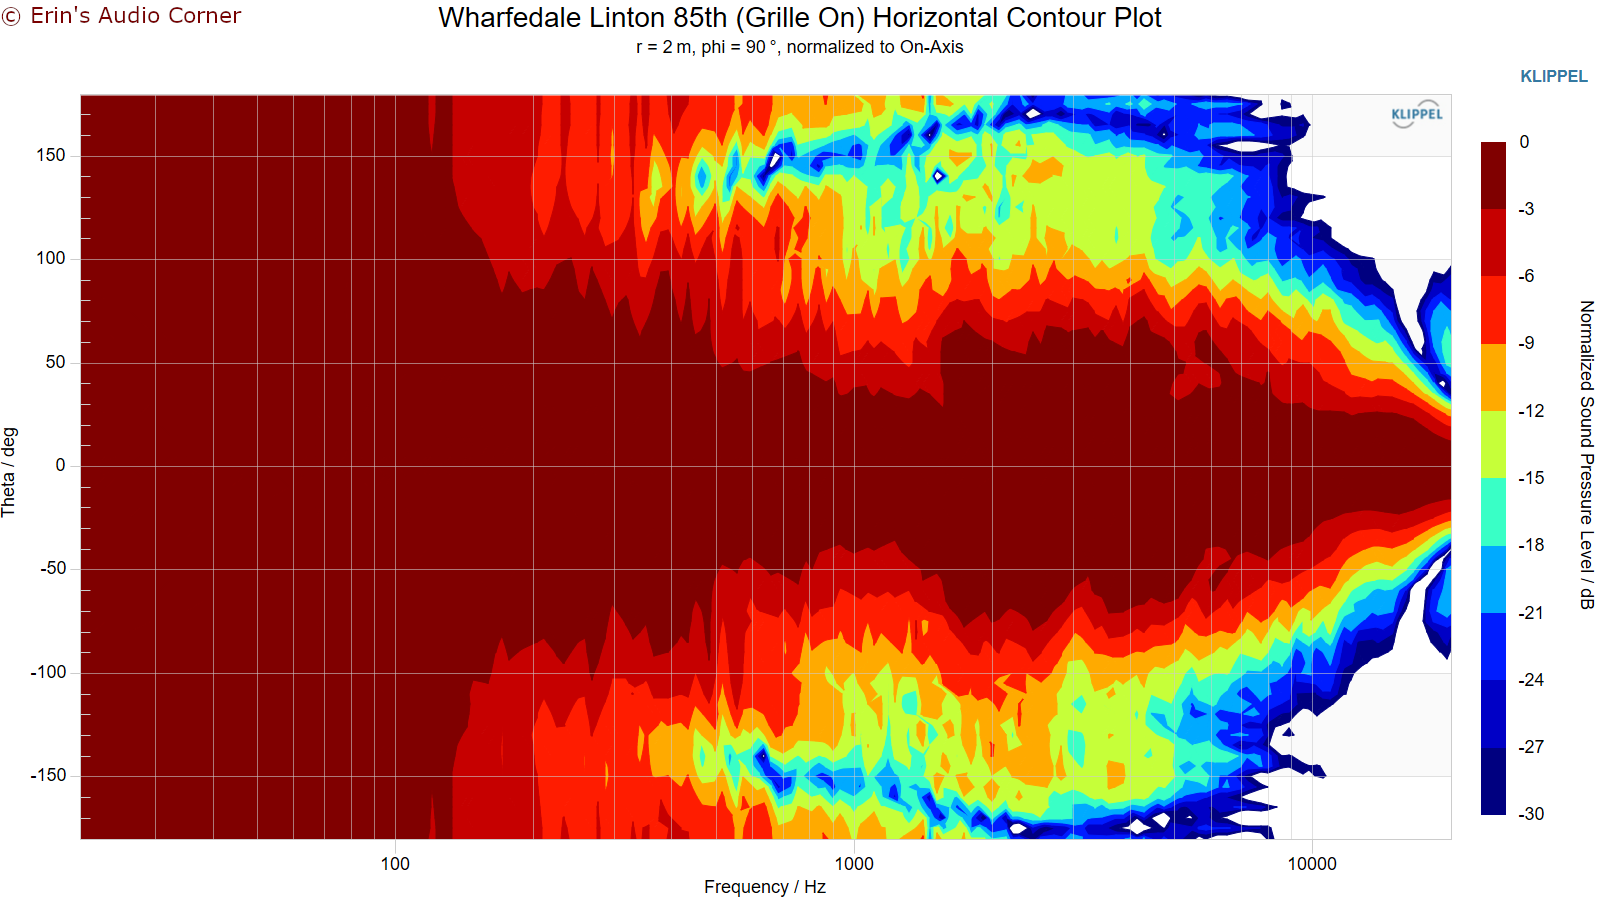 Wharfedale Linton 85th (Grille On) Horizontal Contour Plot.png